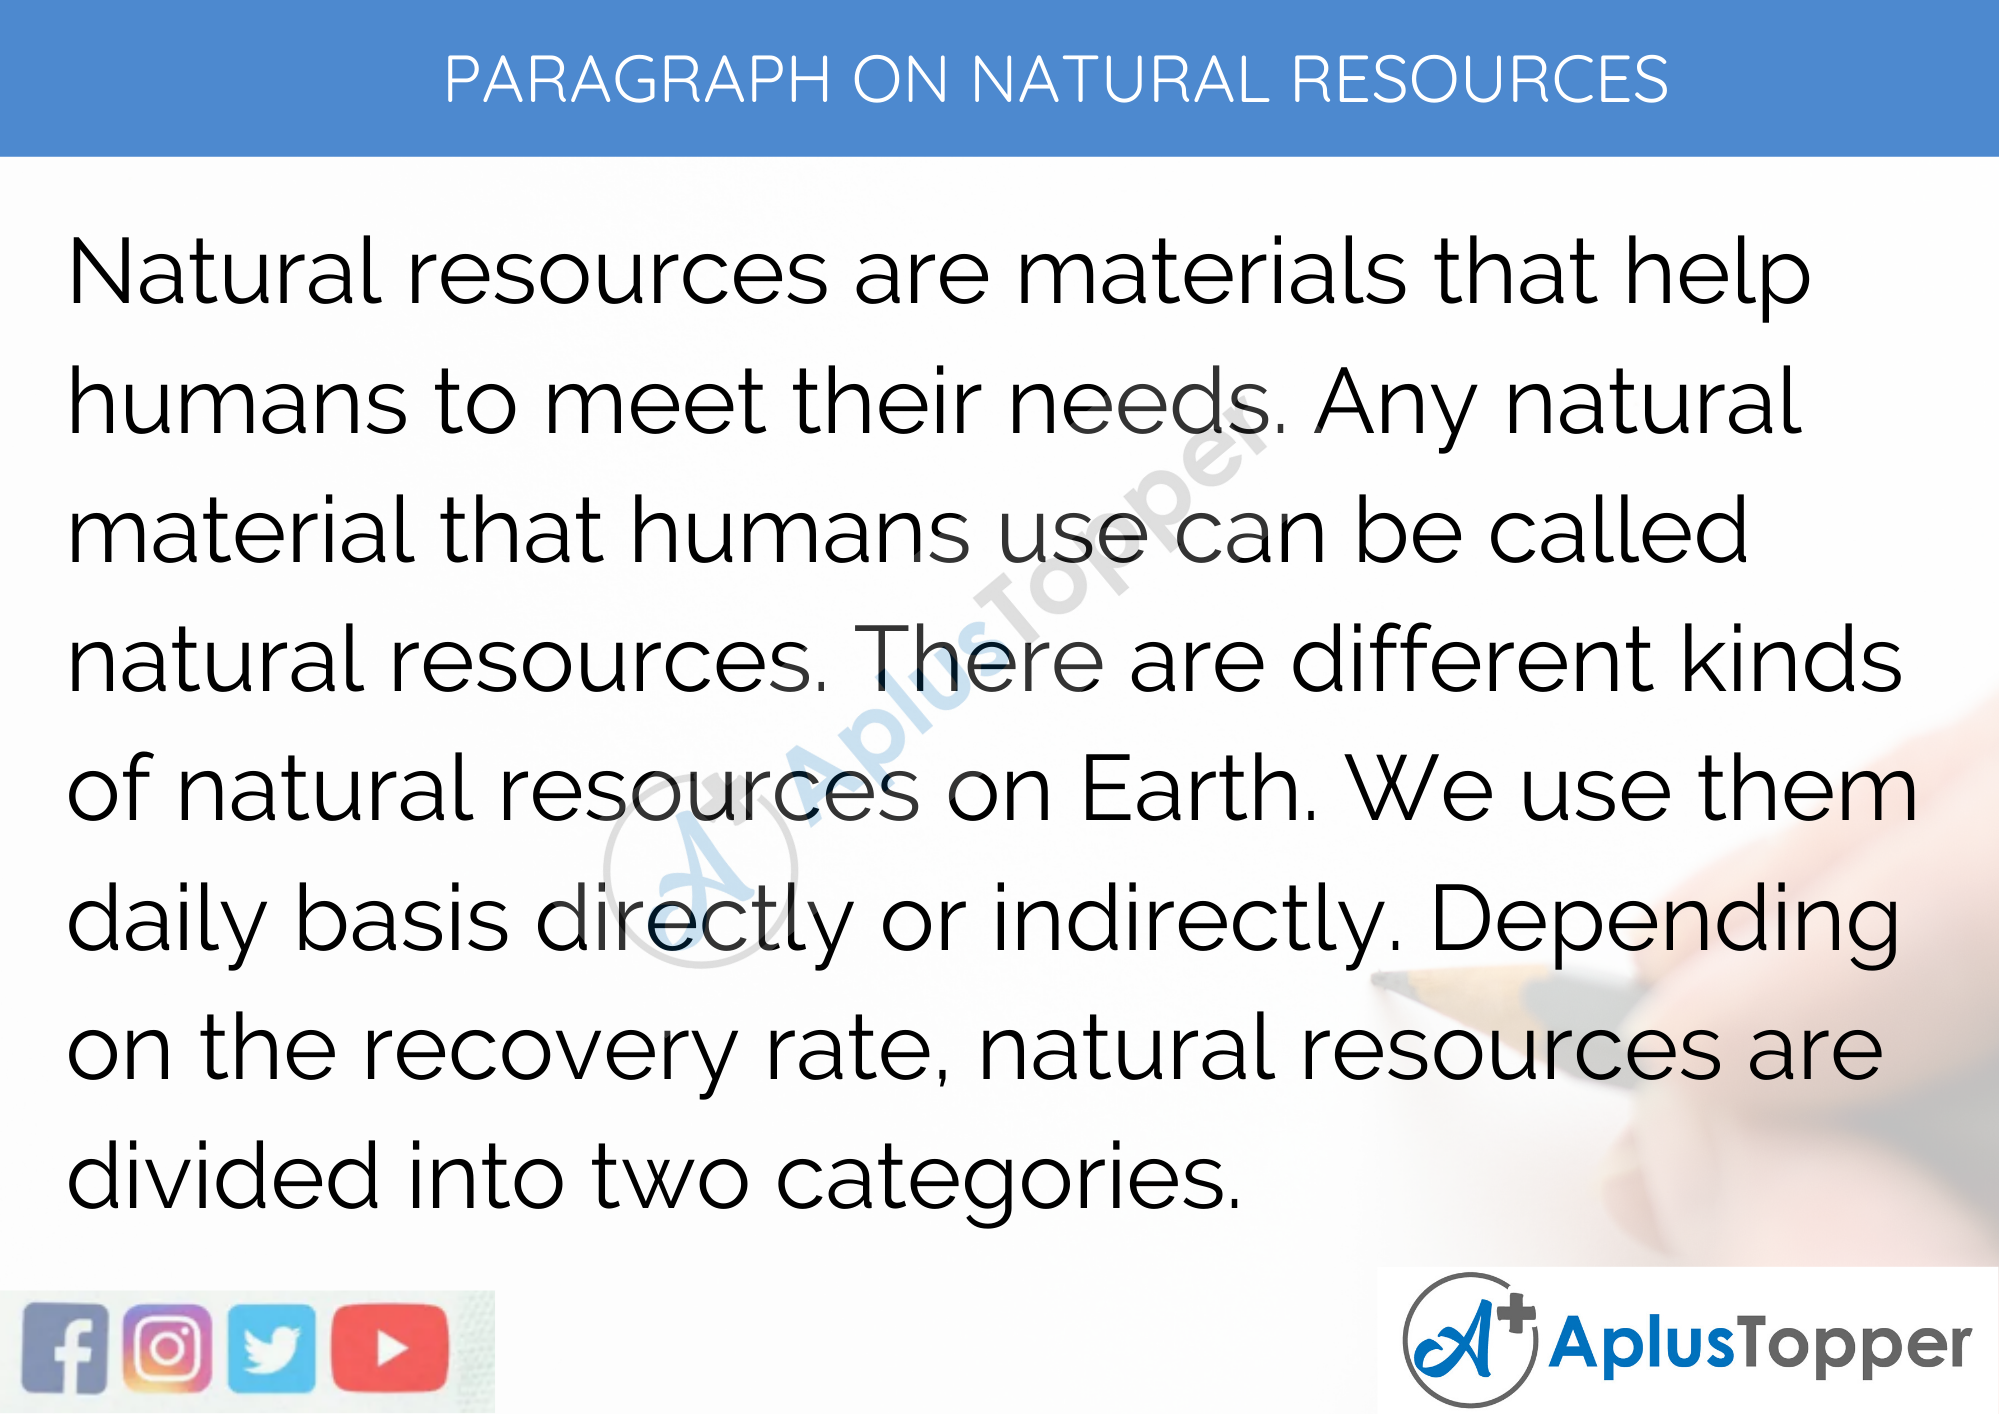 Paragraph on Natural Resources - 250 to 300 Words for Classes 9, 10, 11, 12 and Competitive Exams Students